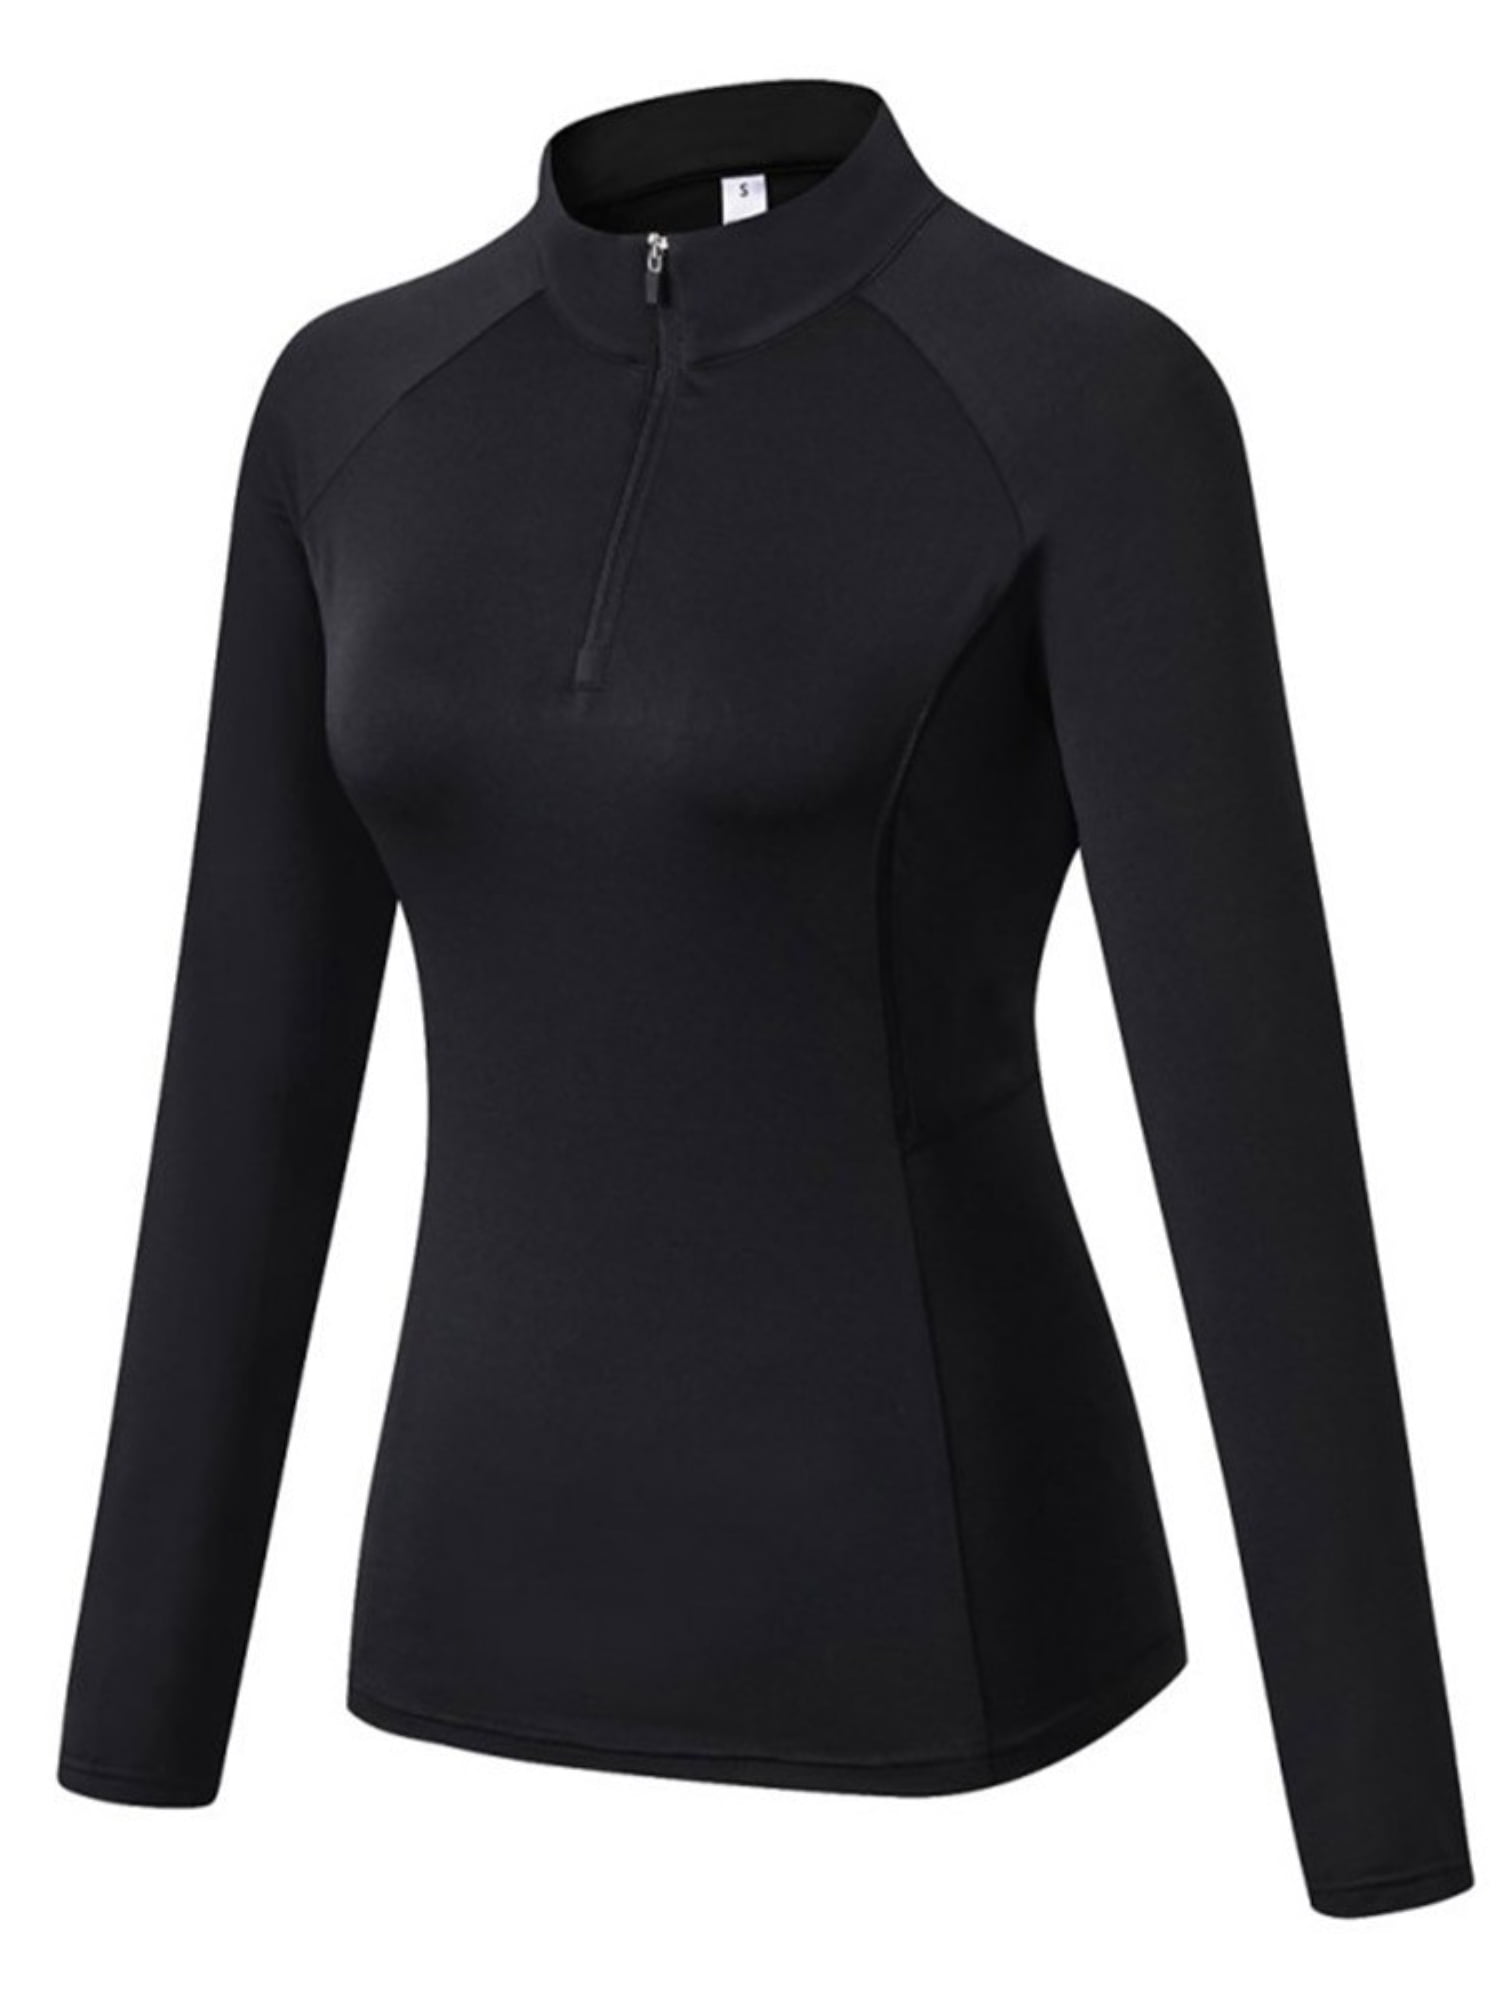 FitsT4 Sports Women's Thermal Shirts Long Sleeve Running Fleece Lined Tops Mock  Neck Workout Cold Weather Gear Thumbholes Black XS at  Women's  Clothing store